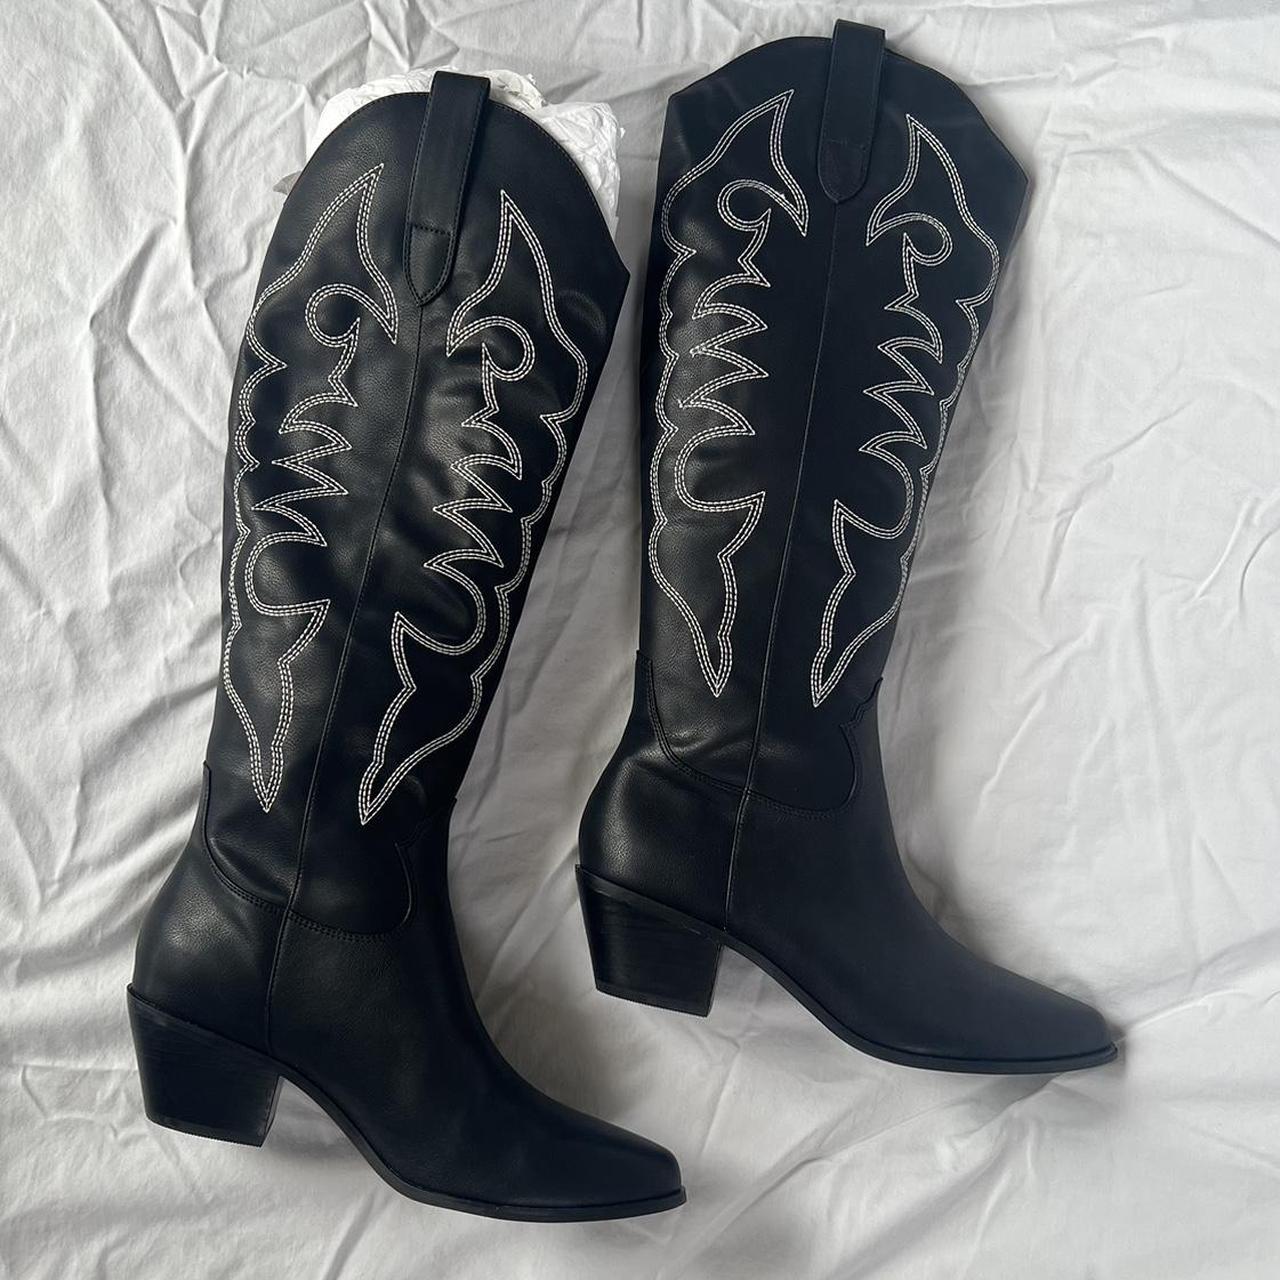 COWBOY/COWGIRL BOOTS - BRAND NEW BETTS Size 37/AU... - Depop